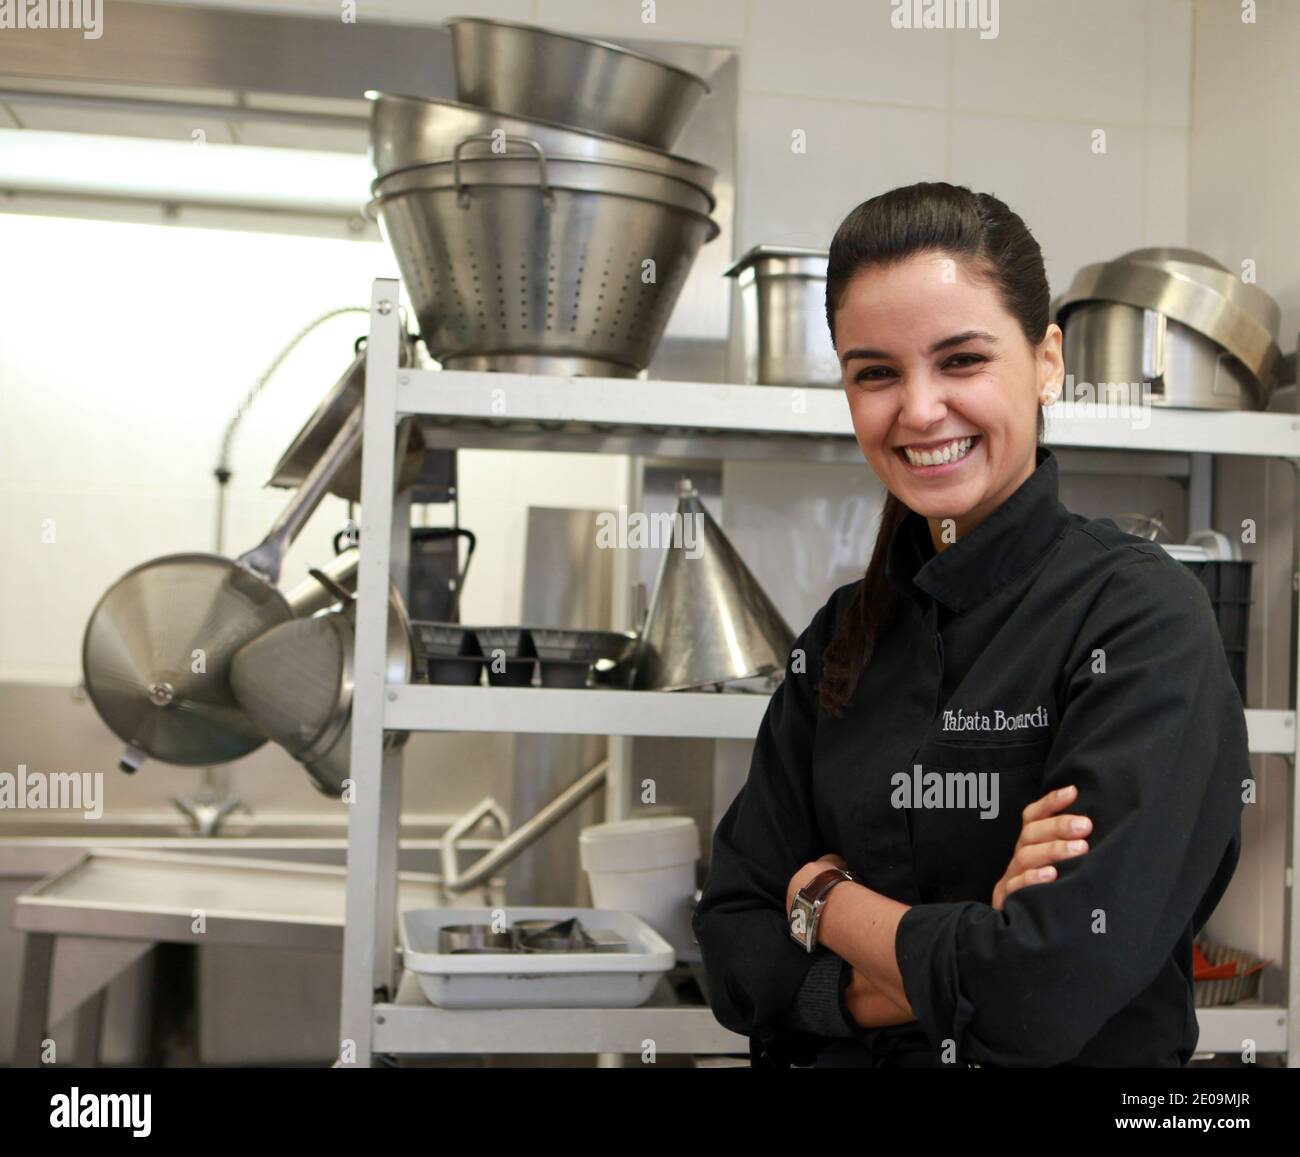 EXCLUSIVE - M6 TV Show 'Top Chef' cooking contest candidate, brazilian-born Tabata Bonardi pictured in Lyon, France on February 1st, 2012. Photo by Vincent Dargent/ABACAPRESS.COM Stock Photo